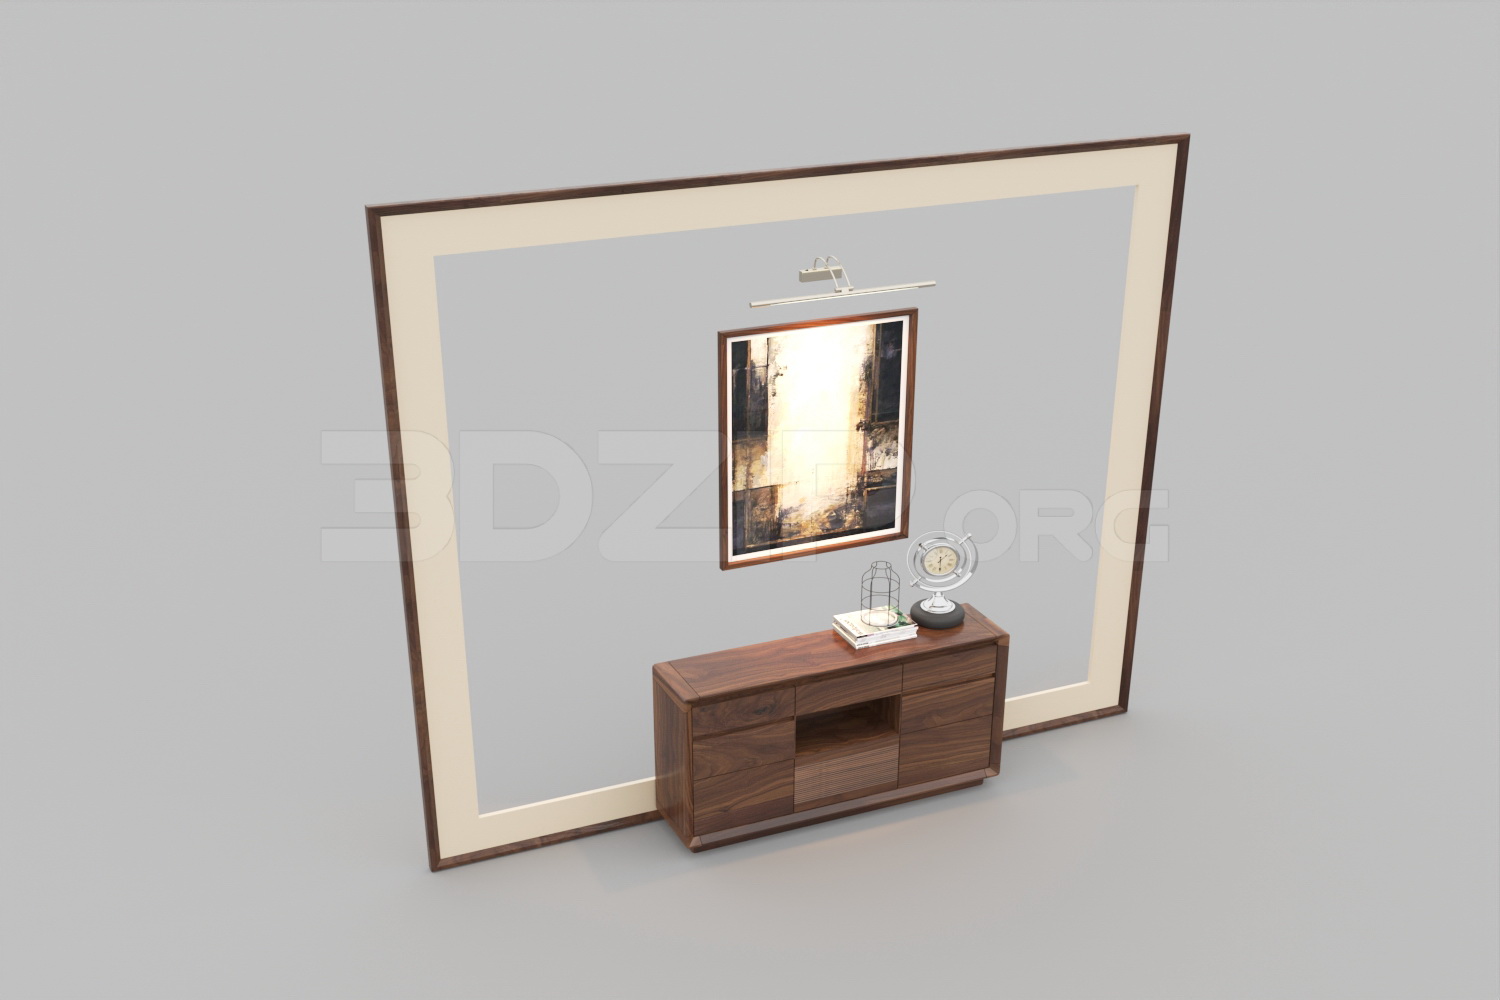 621. Download Free Display Cabinets Model By Chinh Nguyen